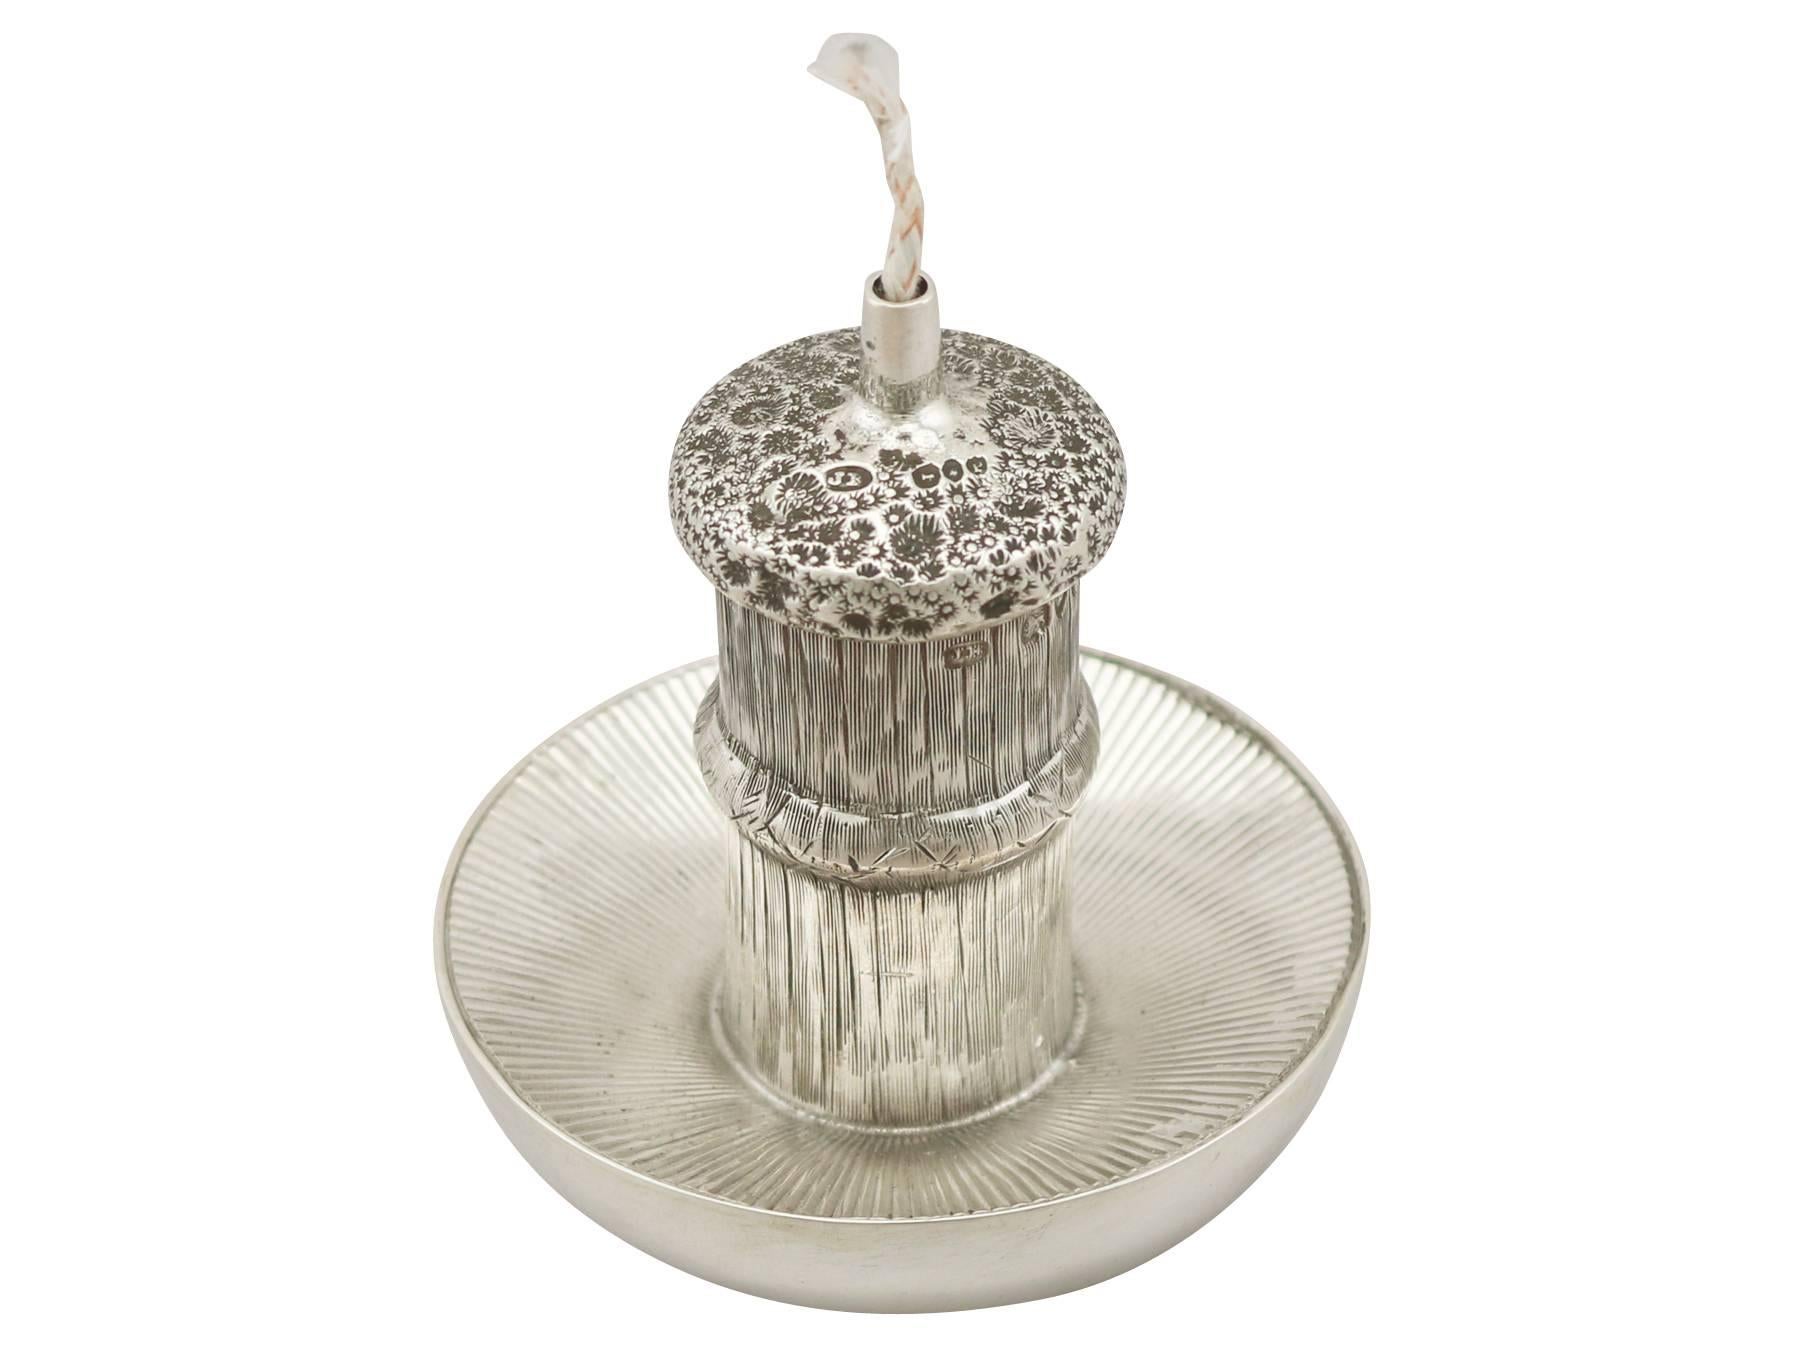 An exceptional, fine and impressive antique Victorian English sterling silver cigarette/cigar table lighter modelled in the form of a mushroom; an addition to our smoking related silverware collection.

This exceptional antique Victorian cast